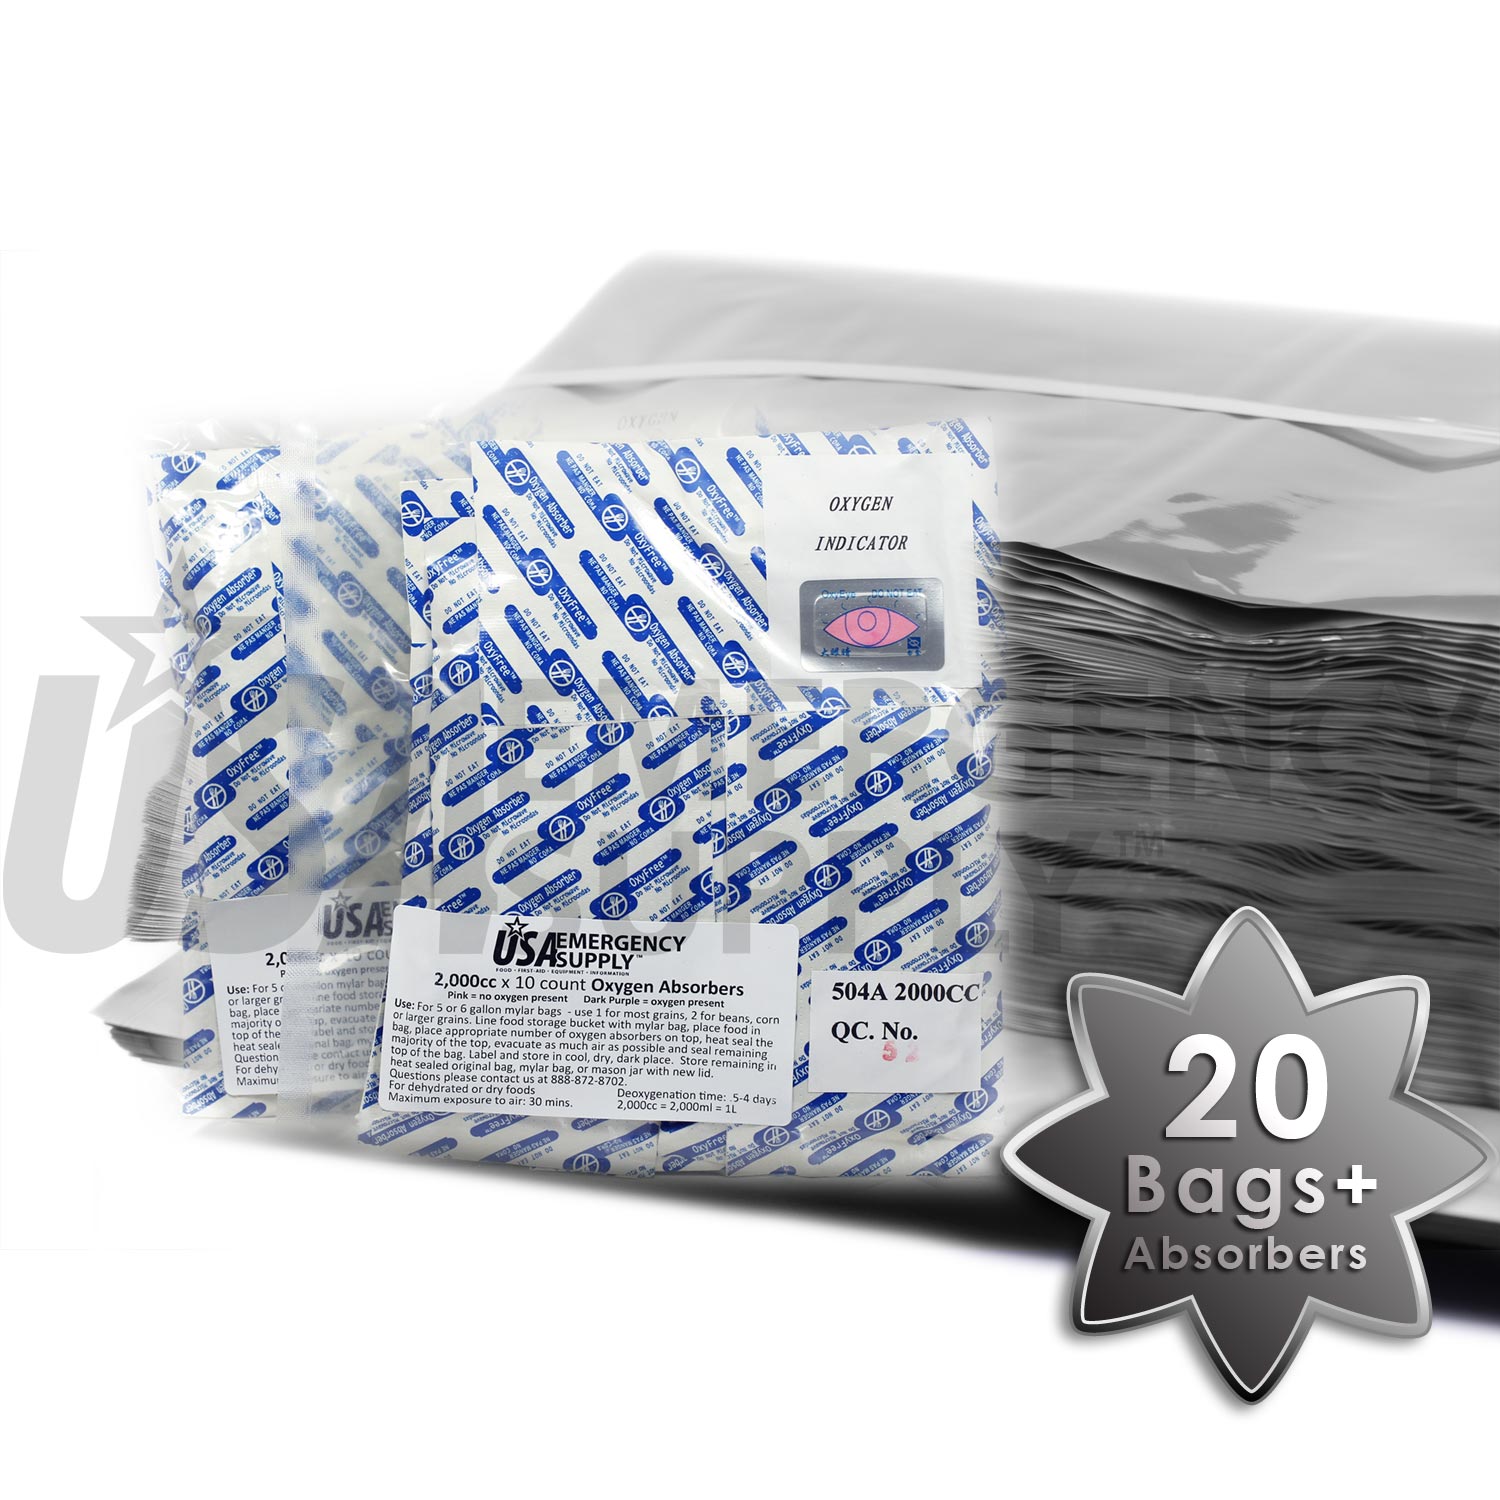 5 Gallon Mylar Food Storage Bags With Ziplock And Oxygen Absorbers 20 Count